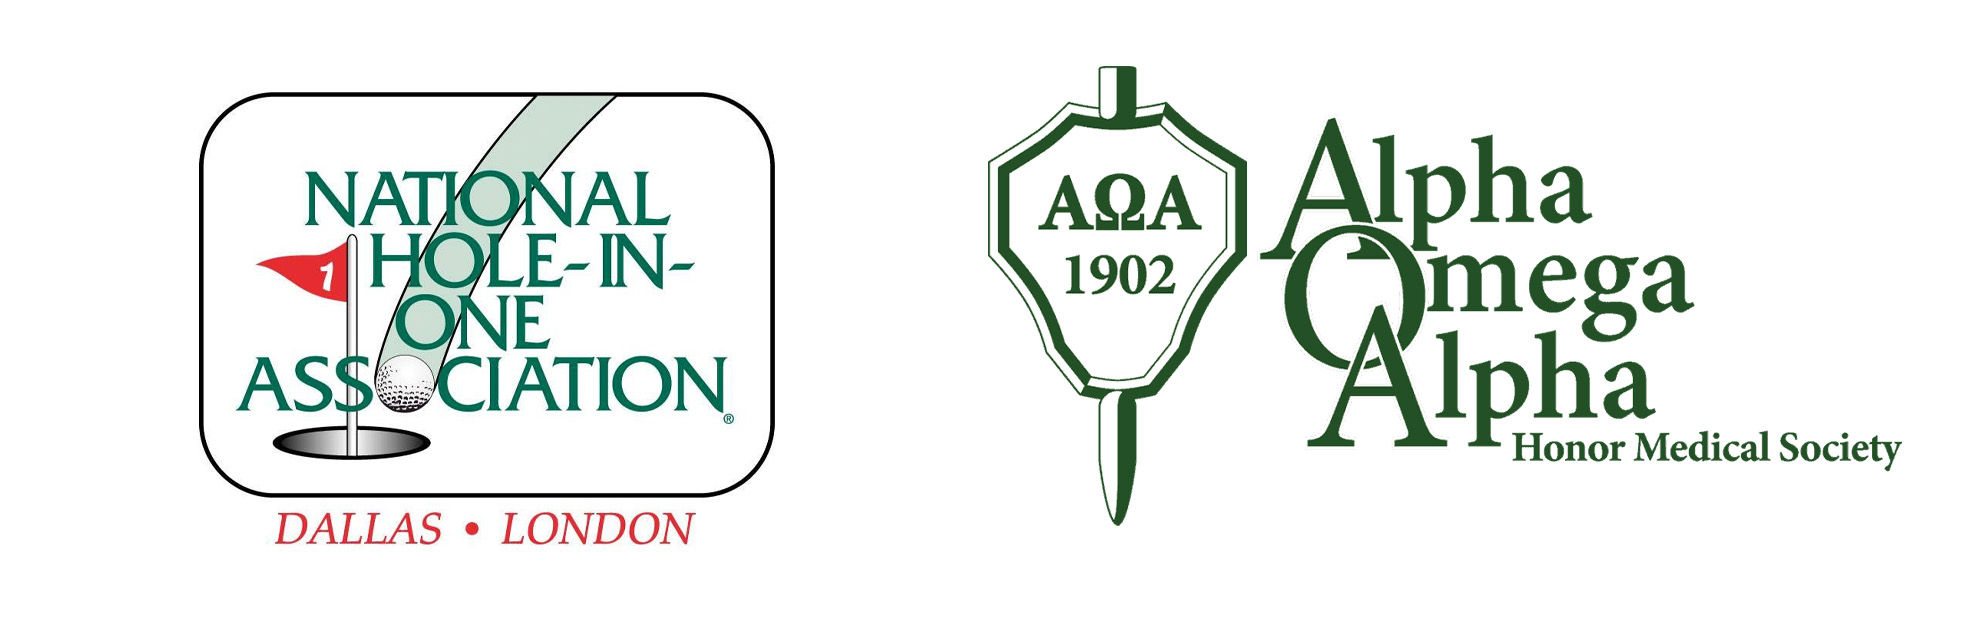 National Hole-in-One Association & Alpha Omega Alpha society logos collage